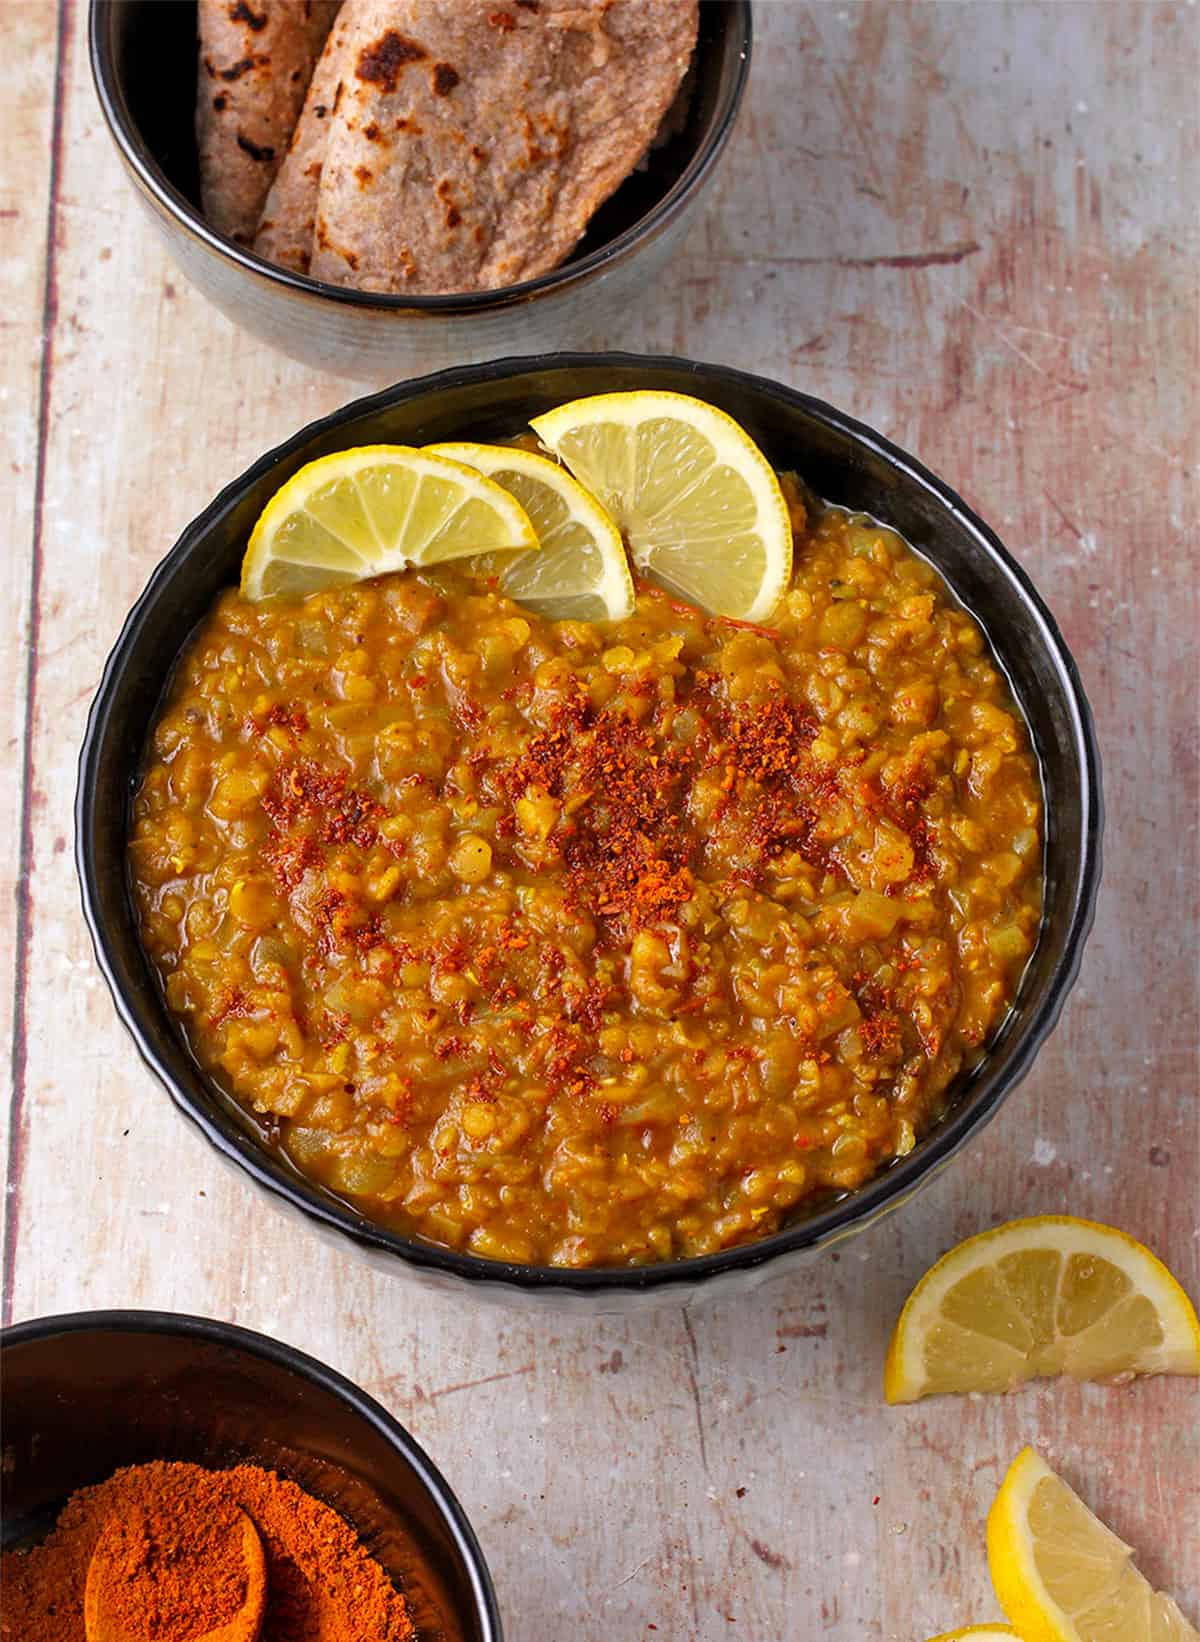 A bowl of Ethiopian red lentils with lemon wedges and another bowl with Berbere spices.